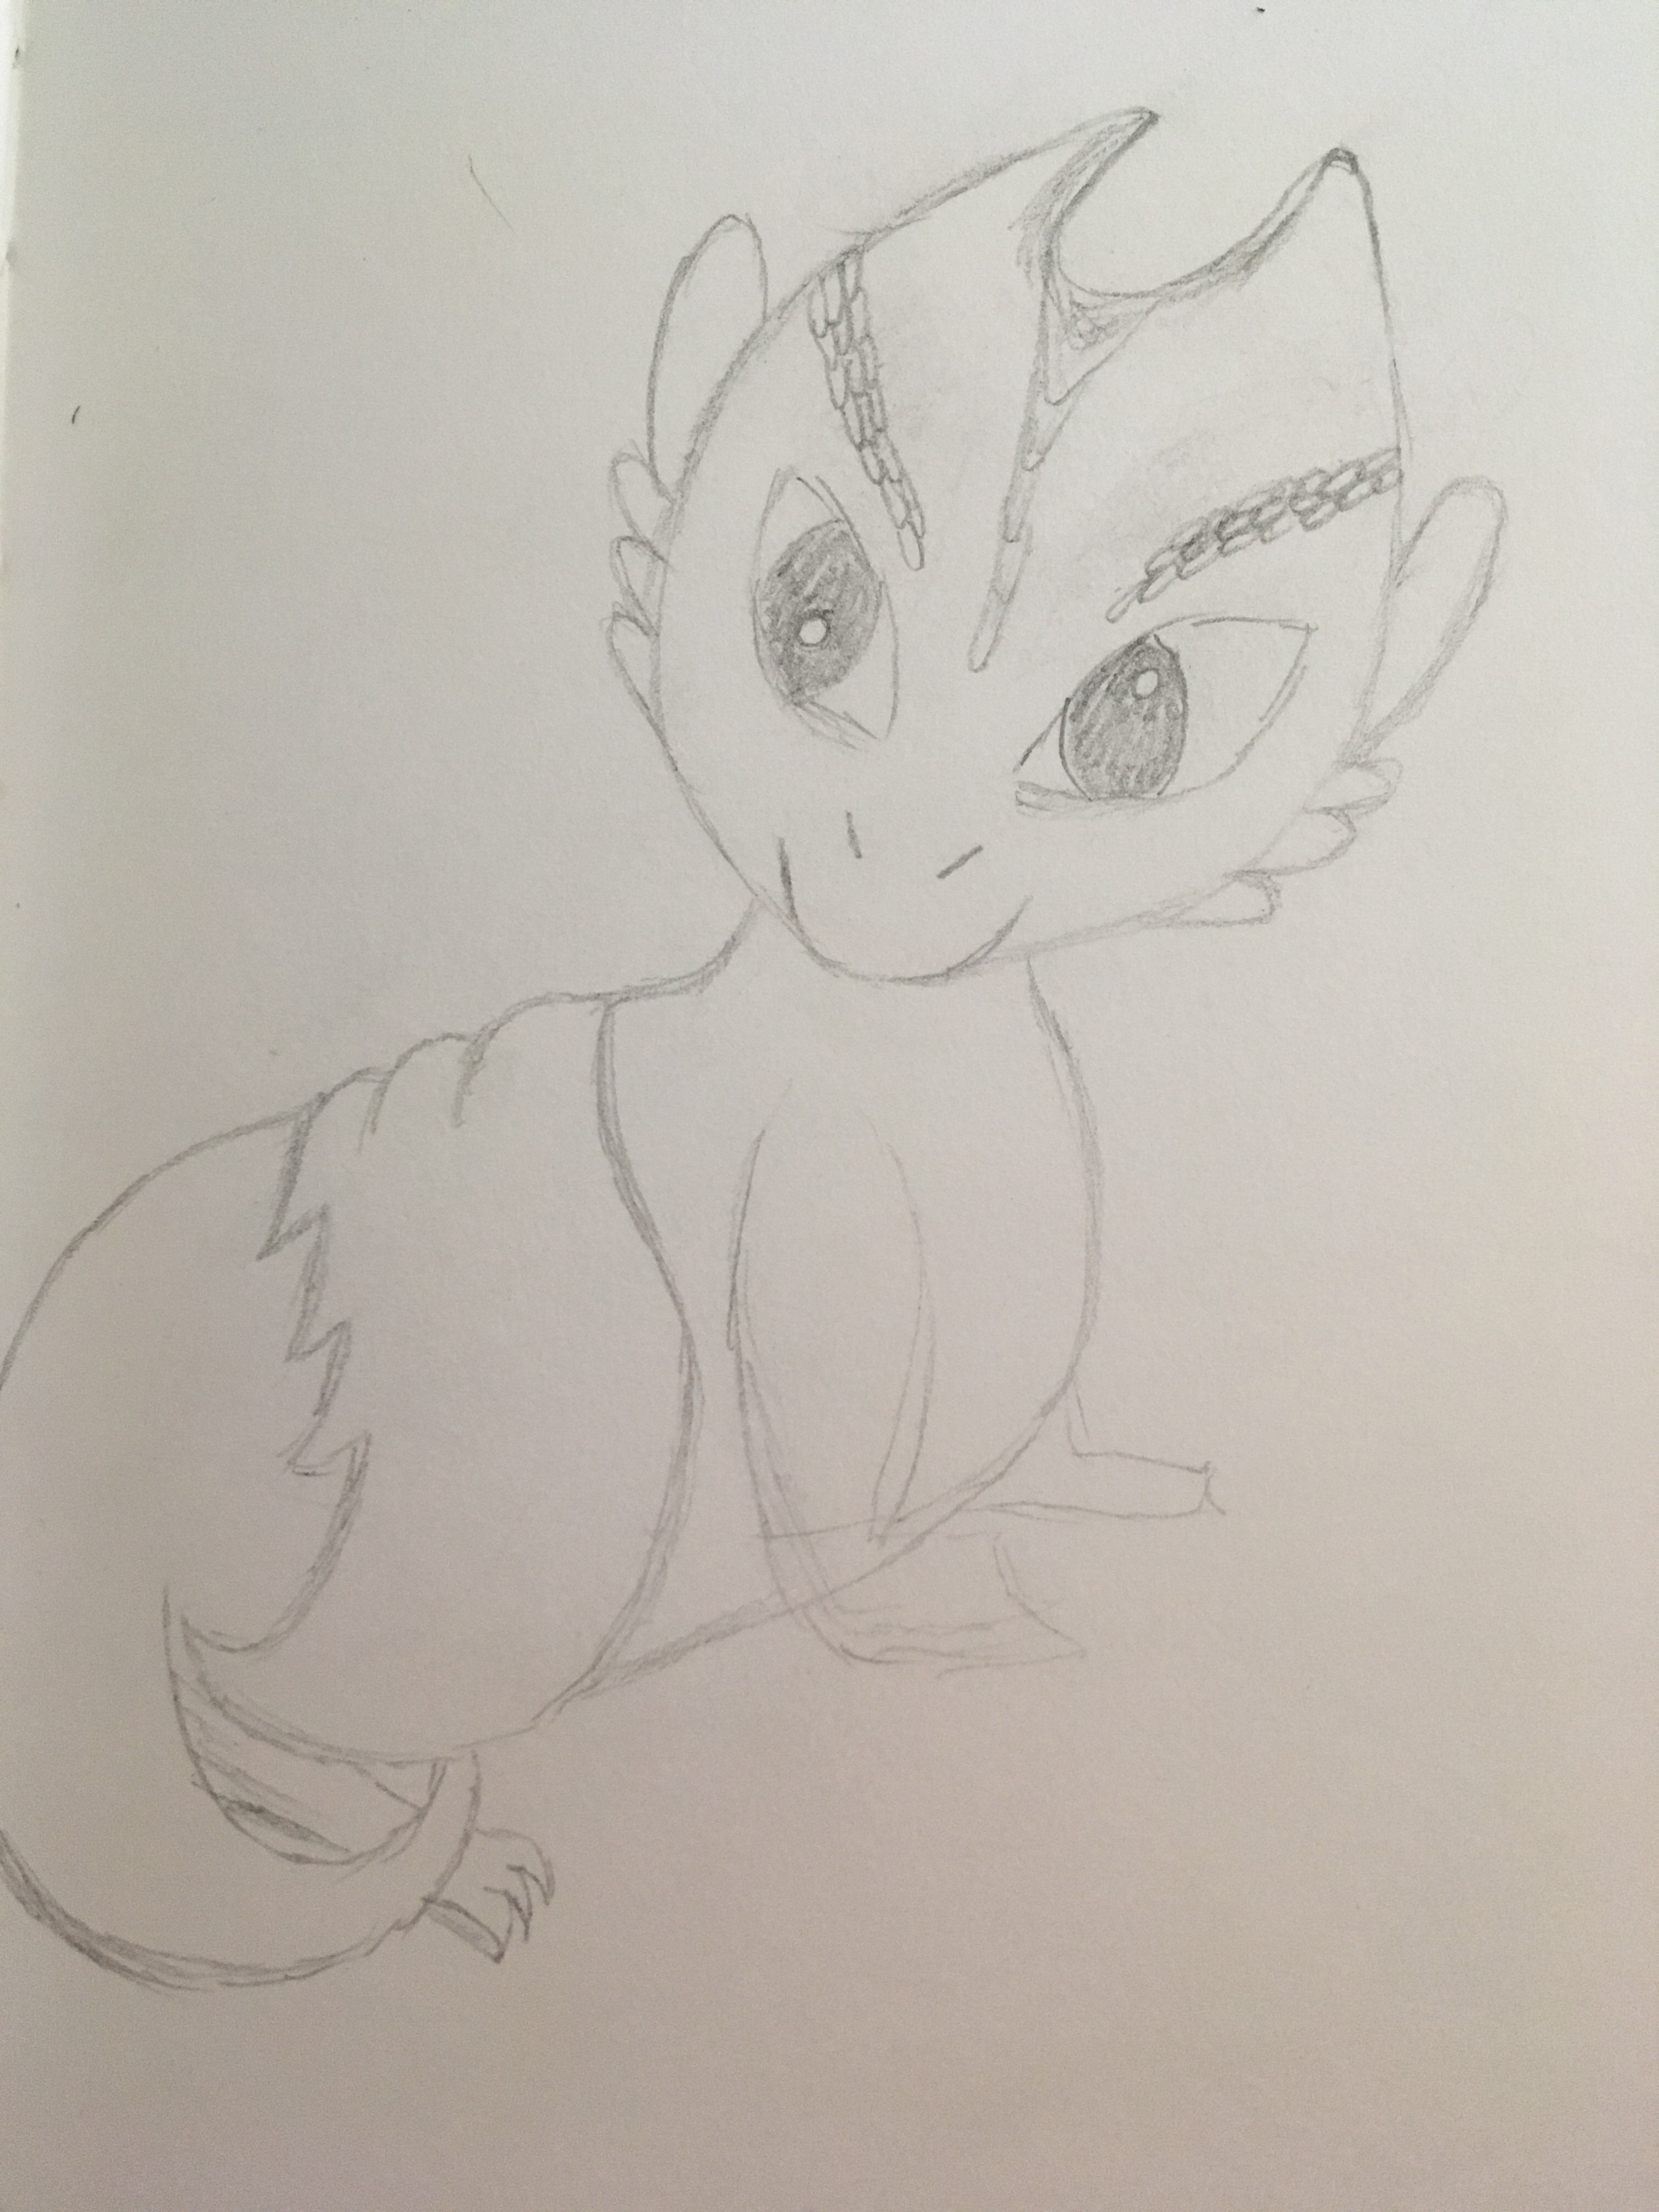 Dragon with folded wings in pencil